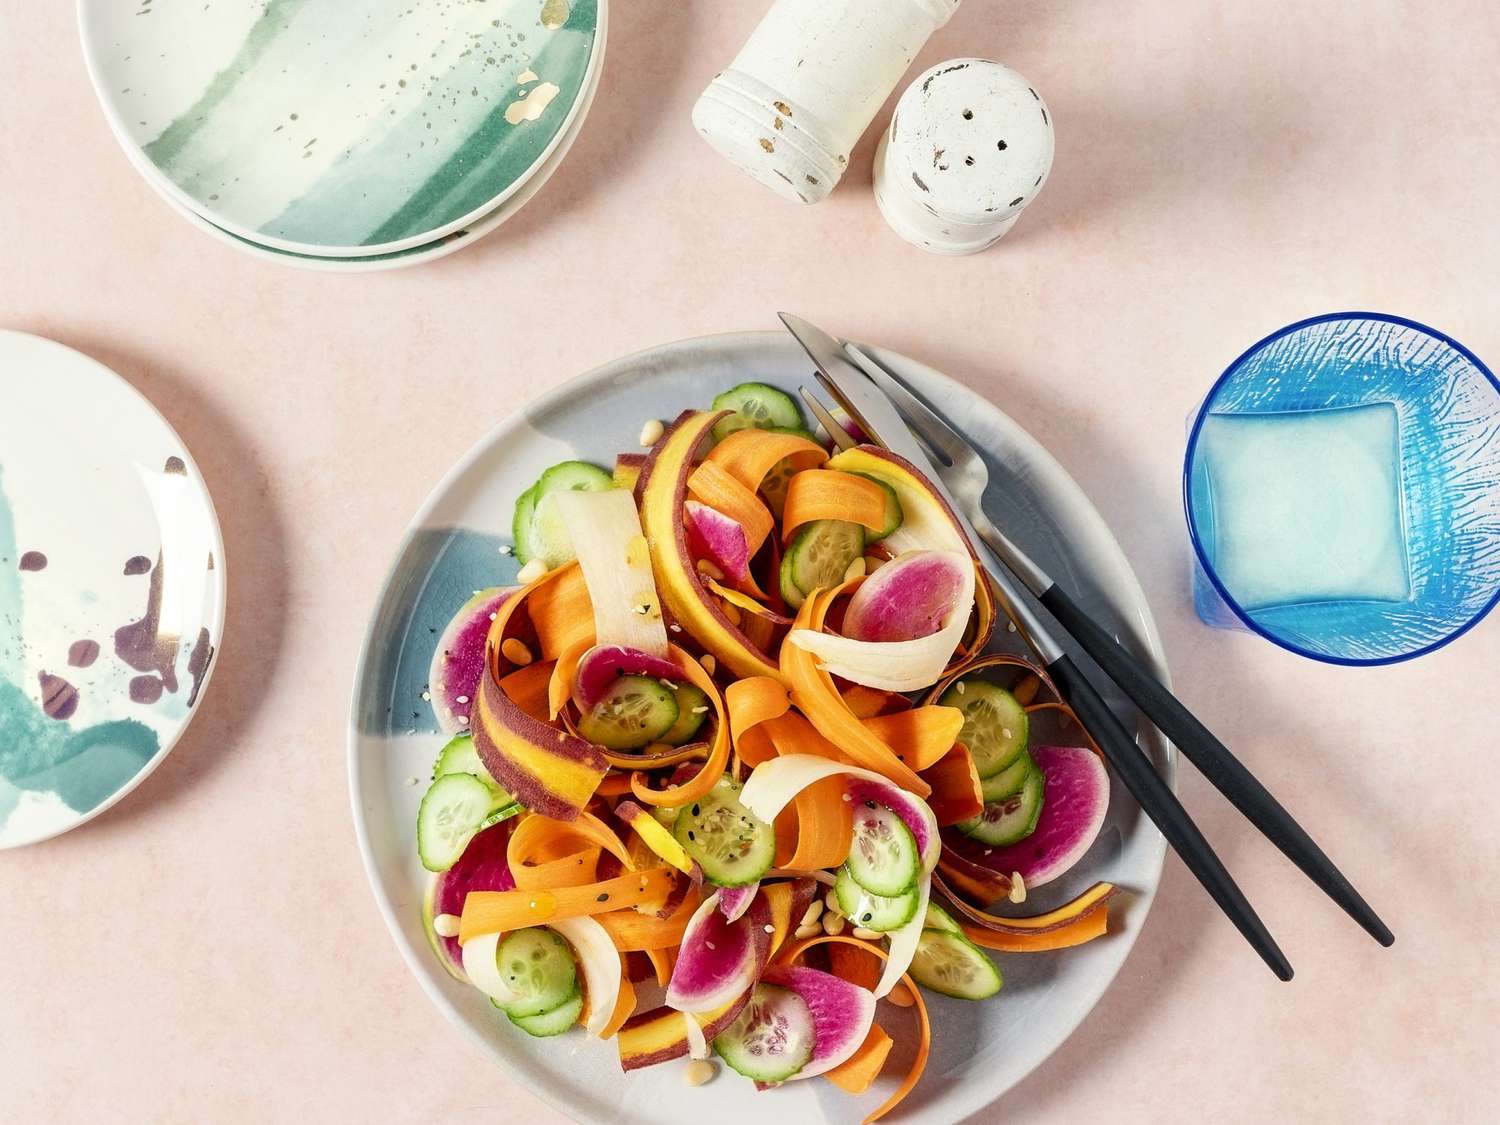 Plate of fresh salad on peach background